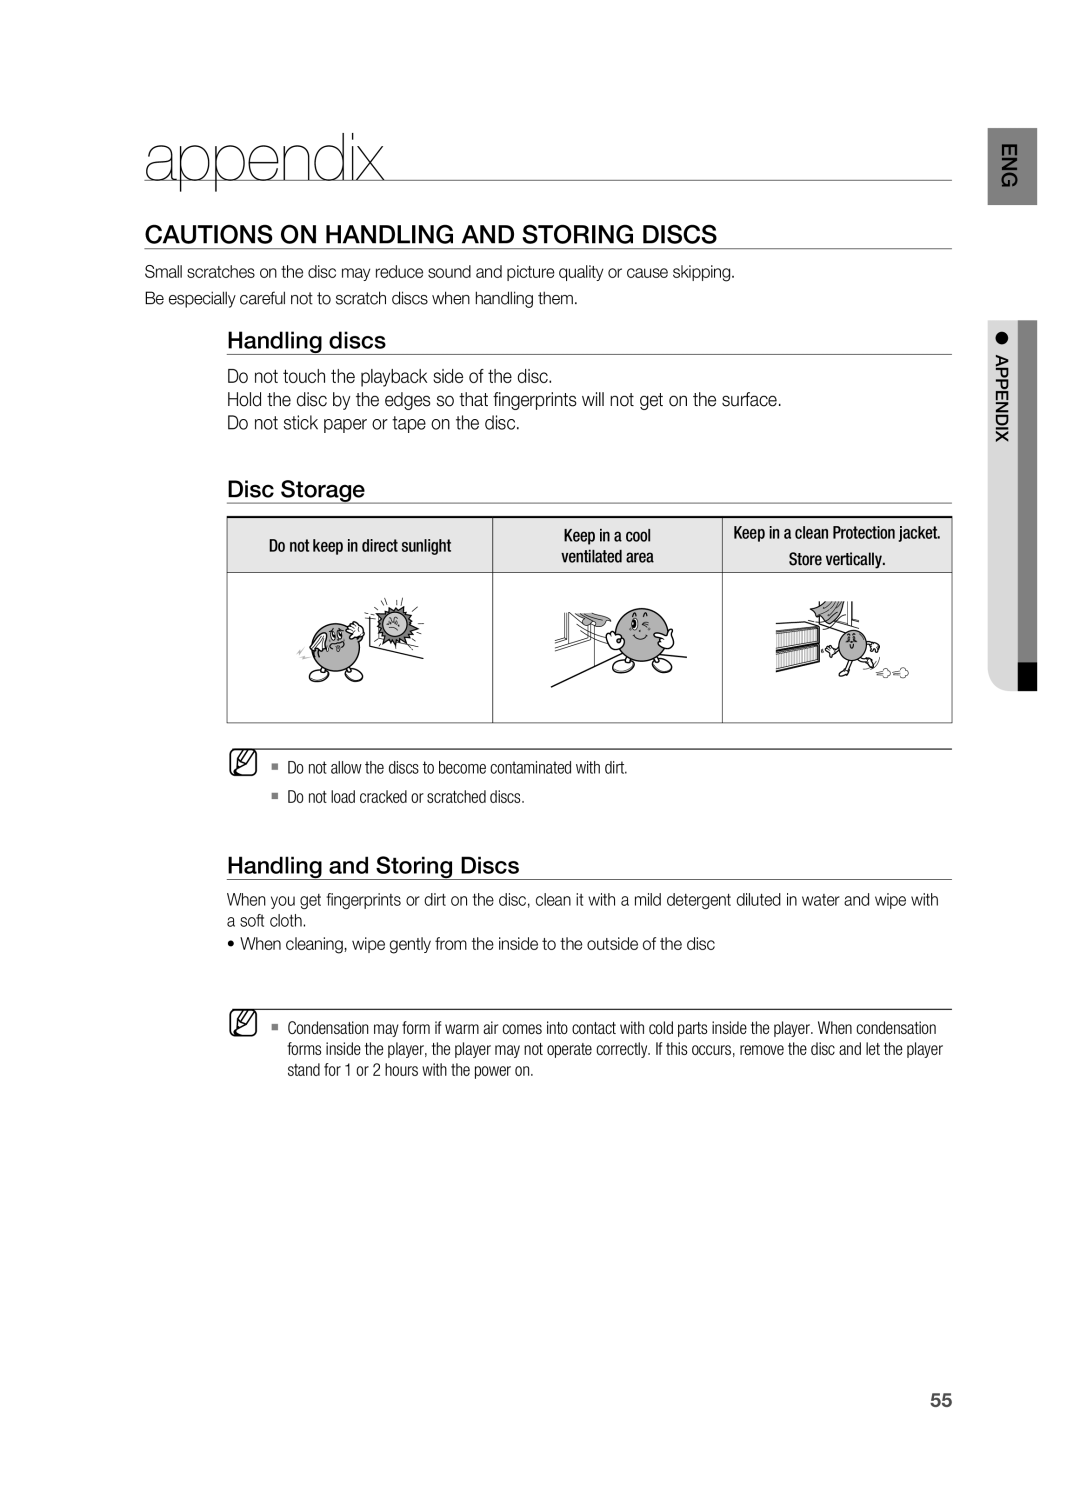 Samsung HT-A100 user manual appendix, Cautions on Handling and Storing Discs, Handling discs, Disc Storage 